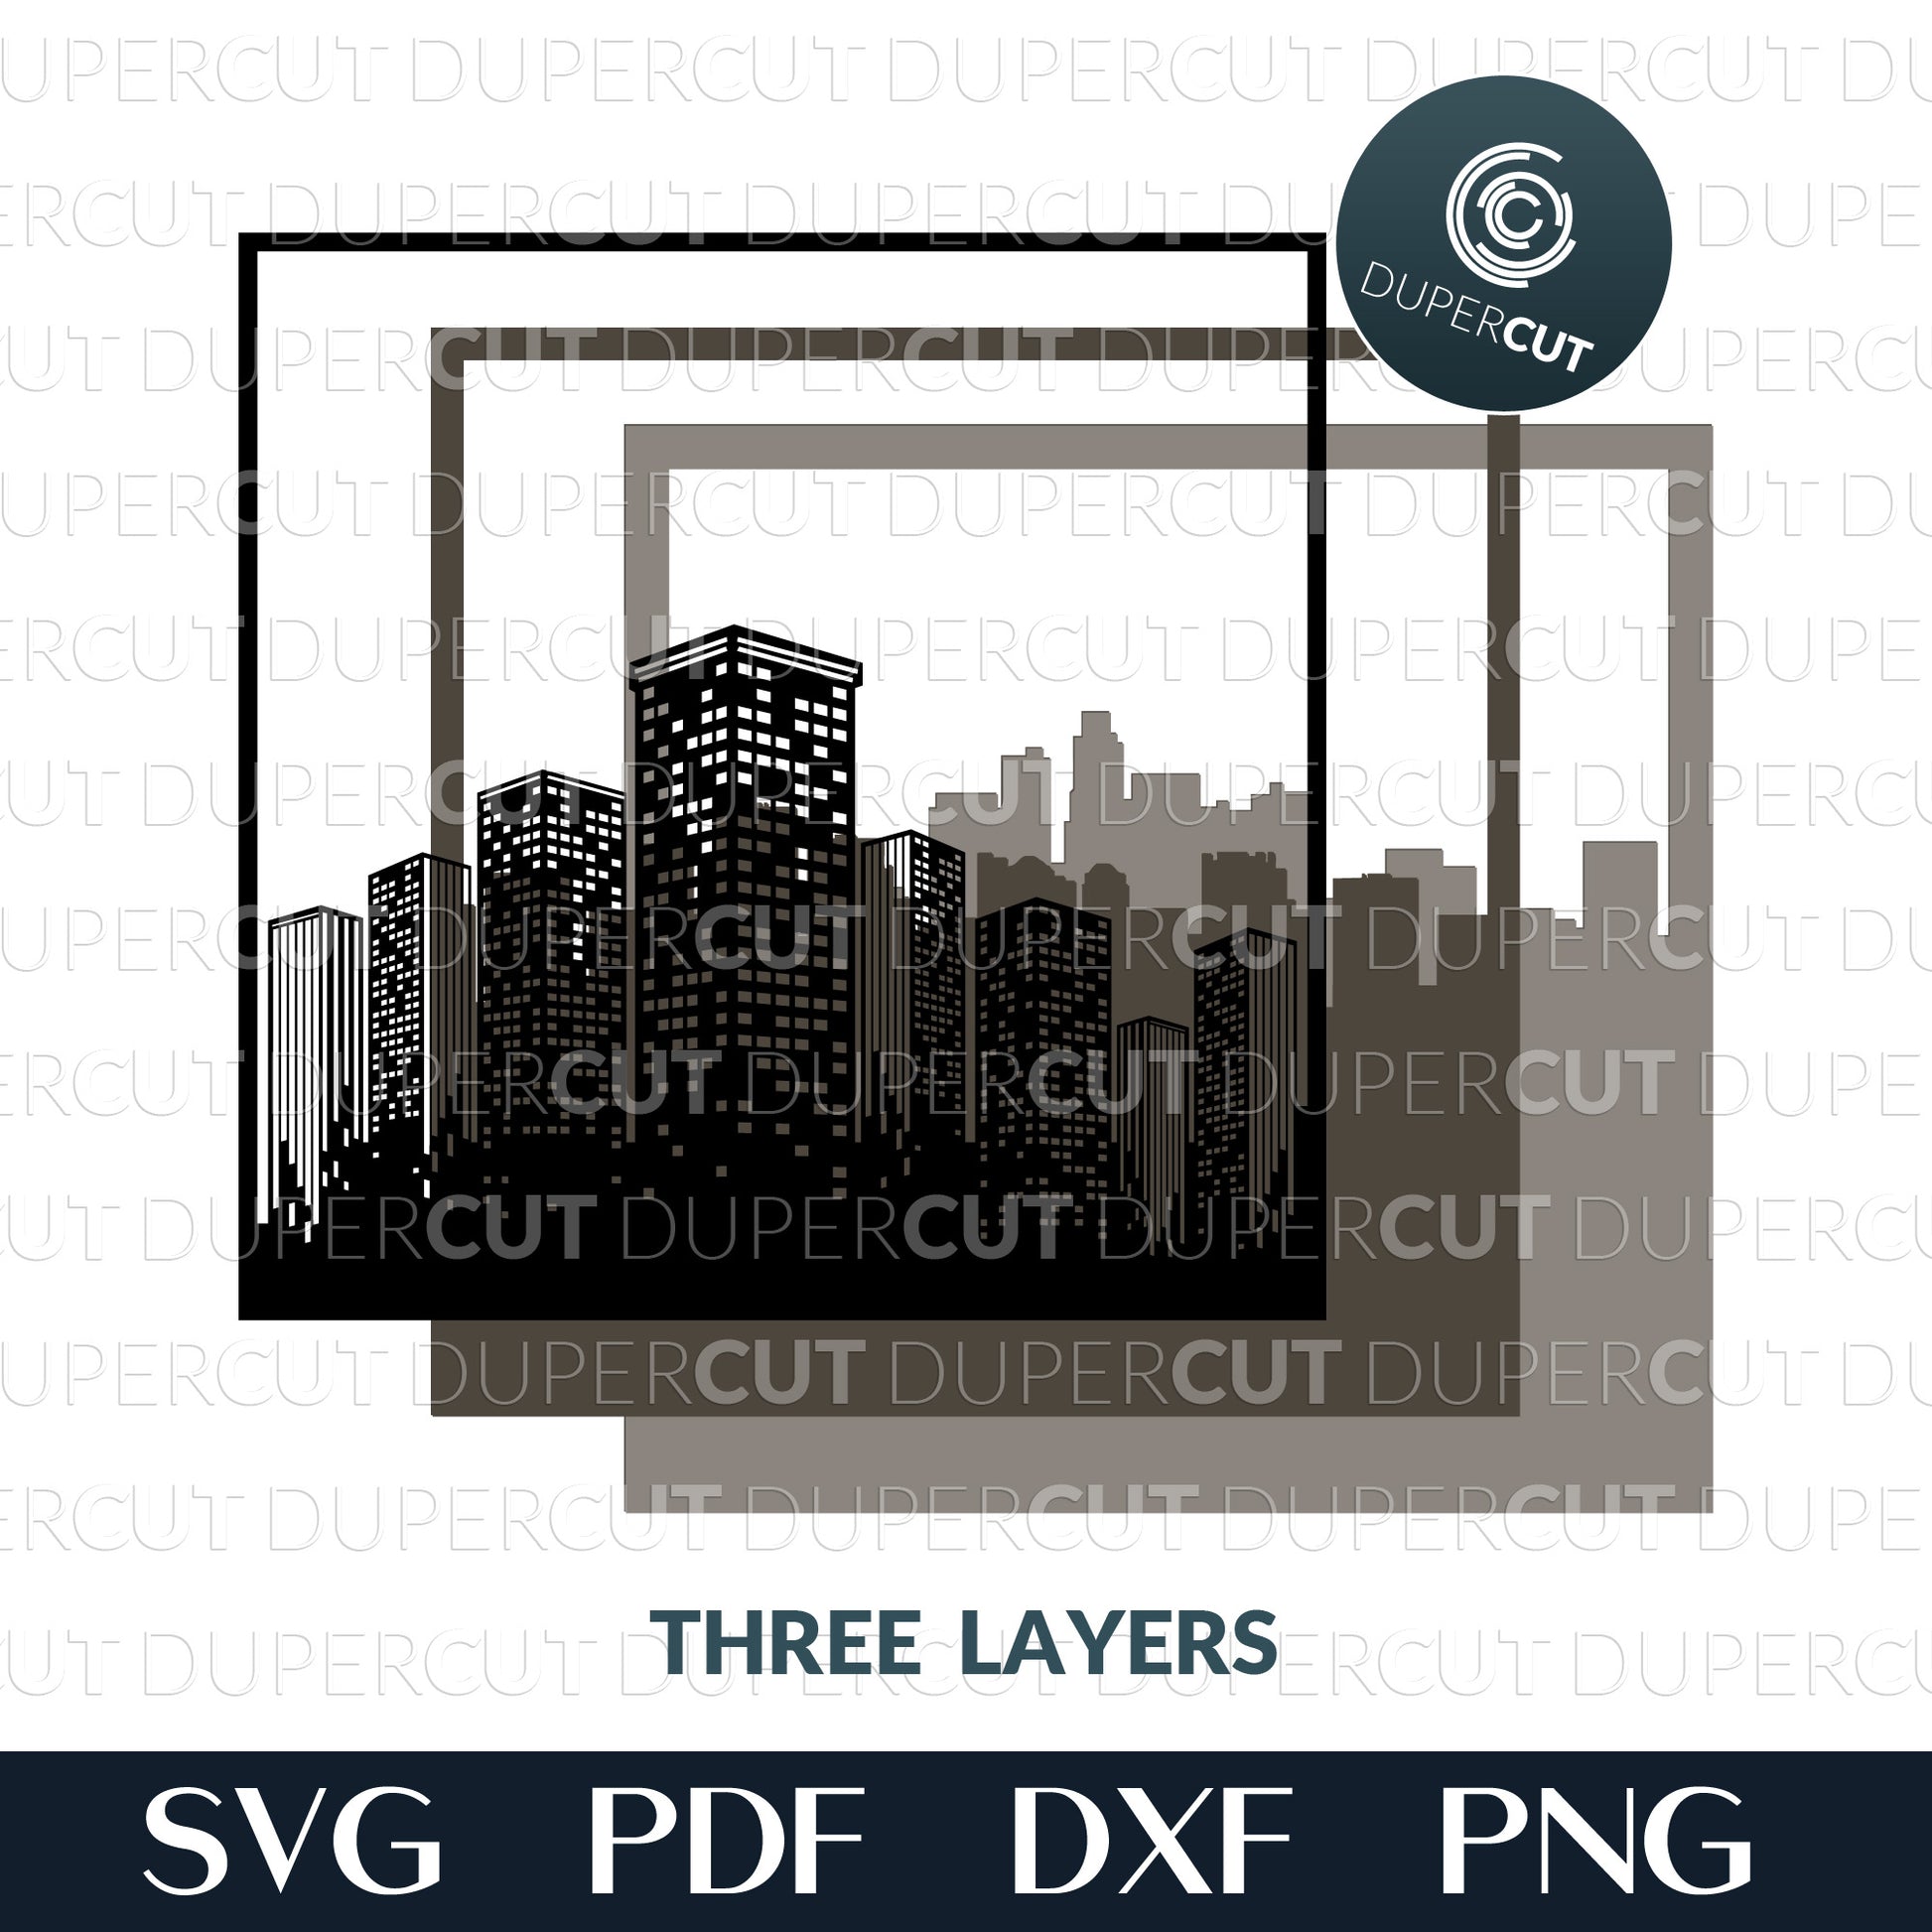 Megapolis city skyline silhouette - layered cutting files - SVG PDF DXF vector template for Glowforge, Cricut, Silhouette Cameo, CNC plasma laser machines by DuperCut